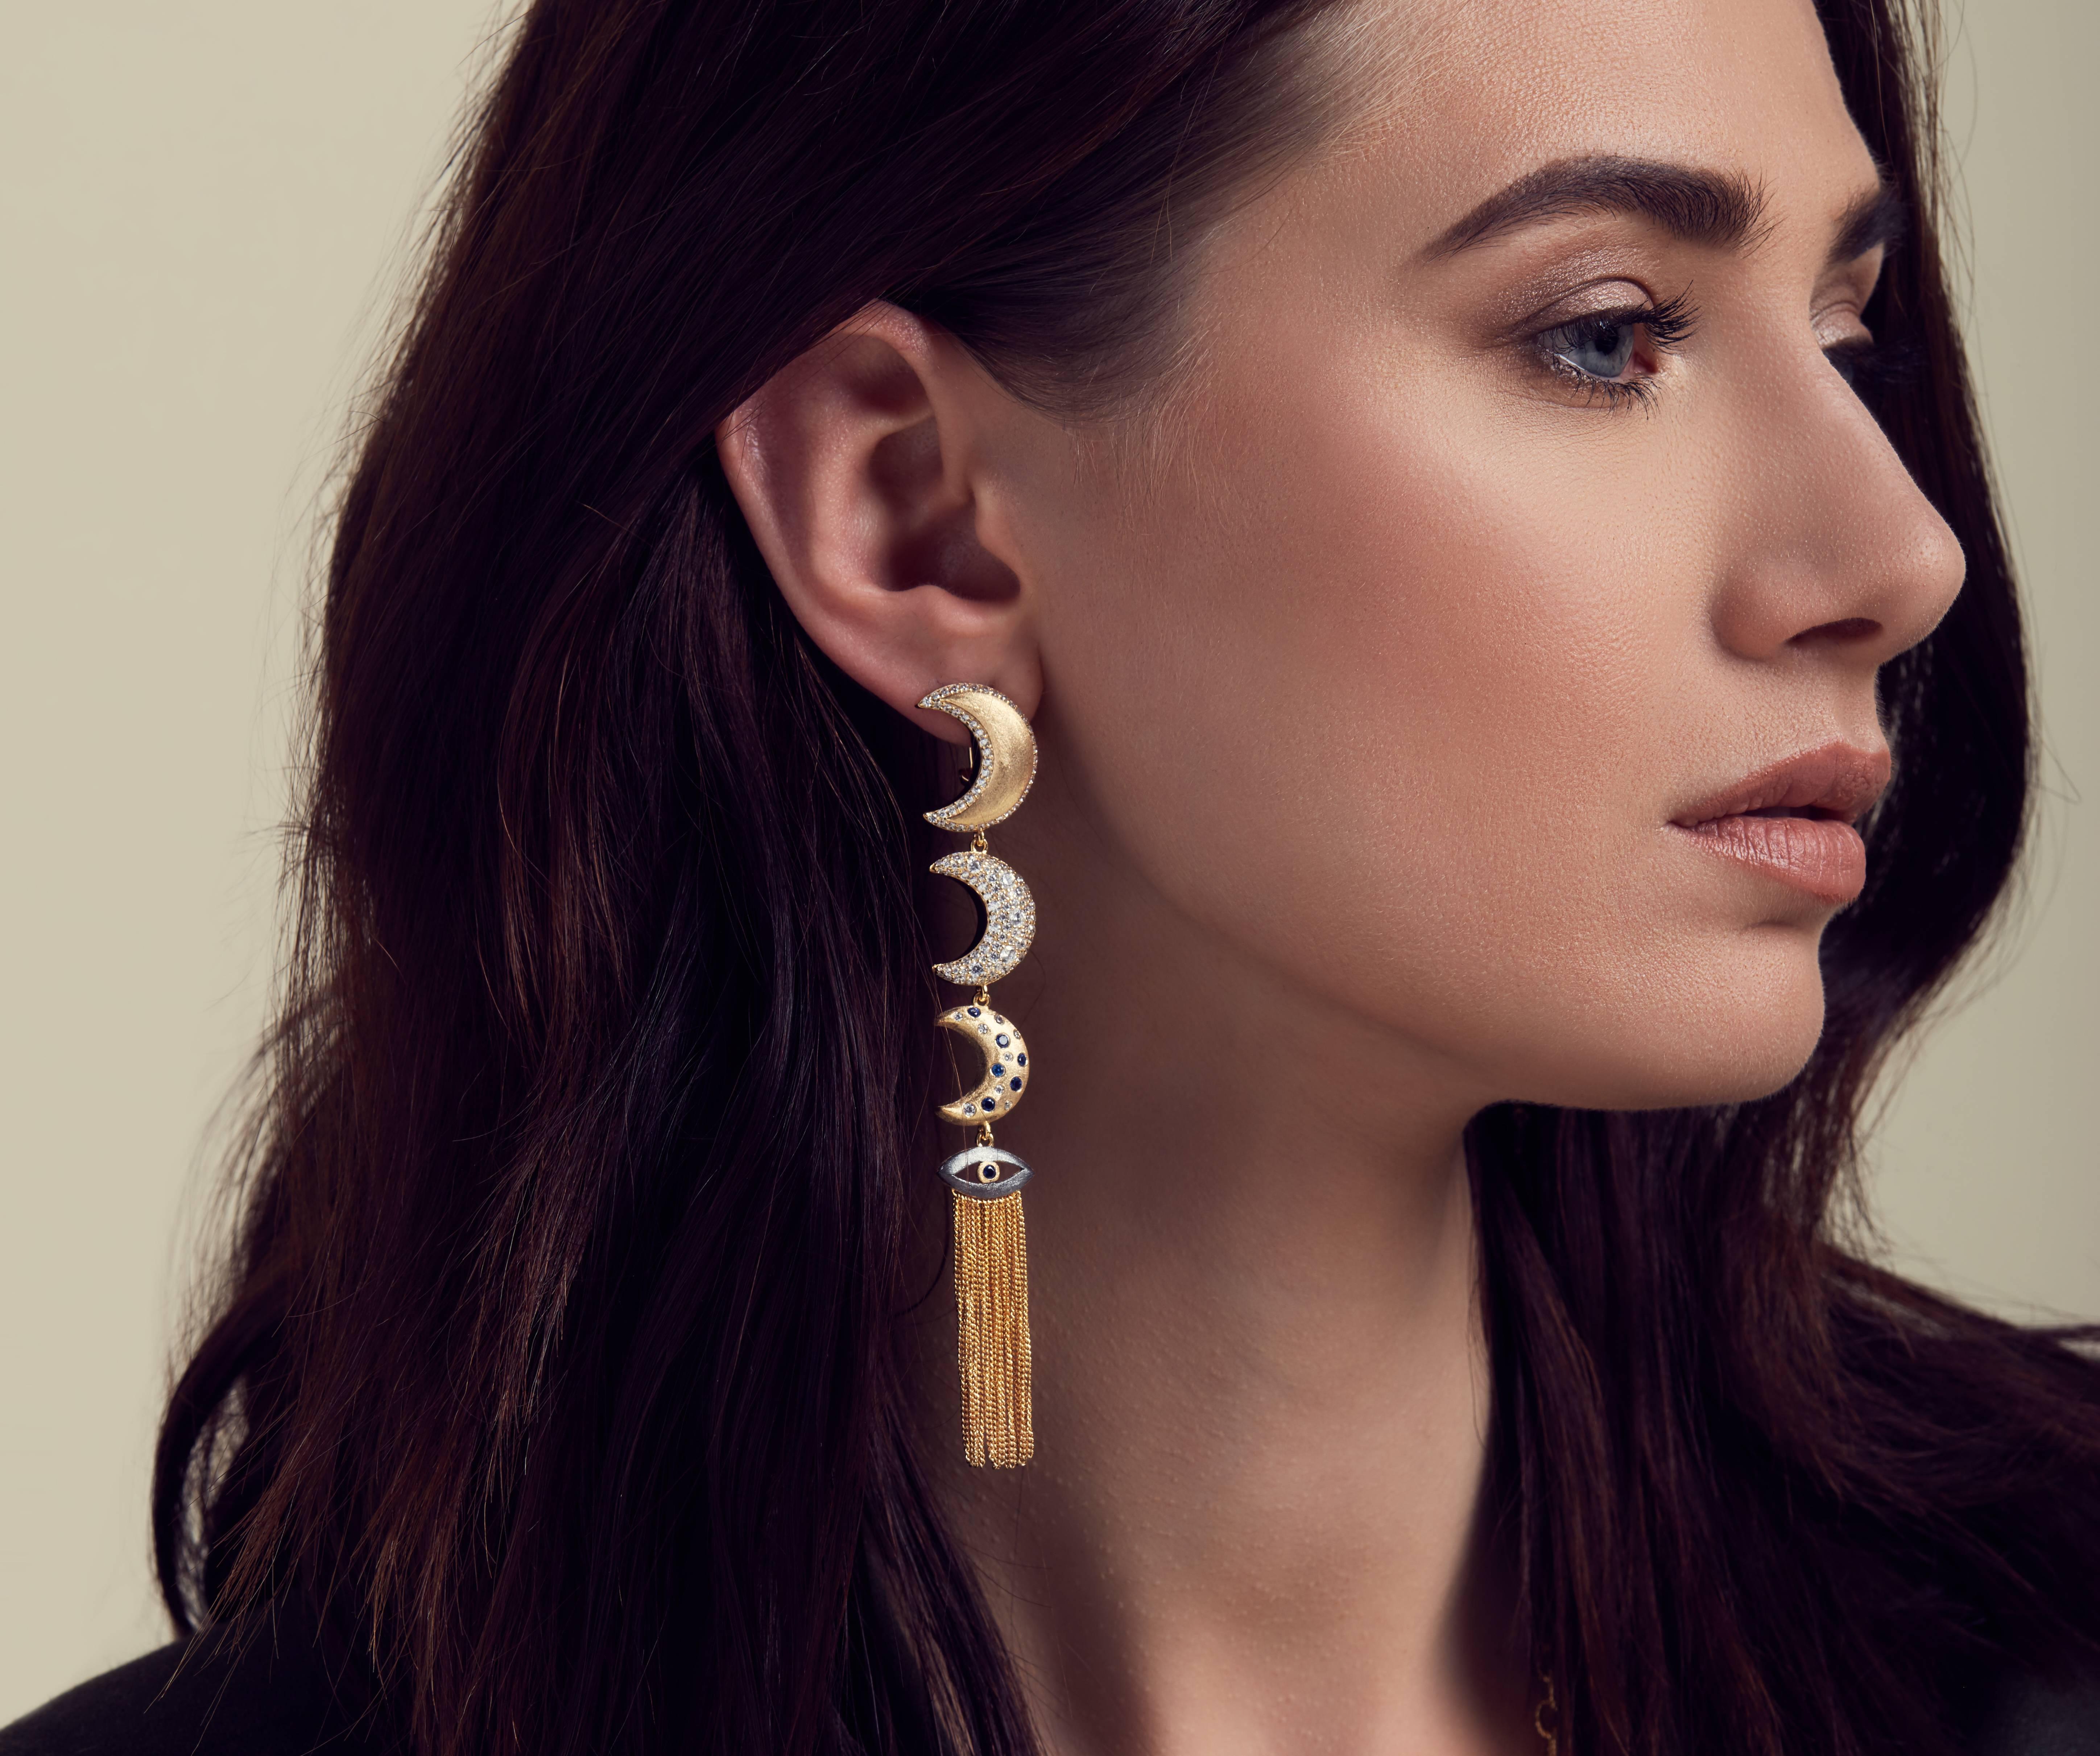 Part of our Sa'mma= Sky Collection. Inspired by the sky, the universal blanket that covers mankind and unifies us all under its protective wings. The Guardian Moon linear earrings are hand crafted  w/ lever back closure for more comfortable fit.